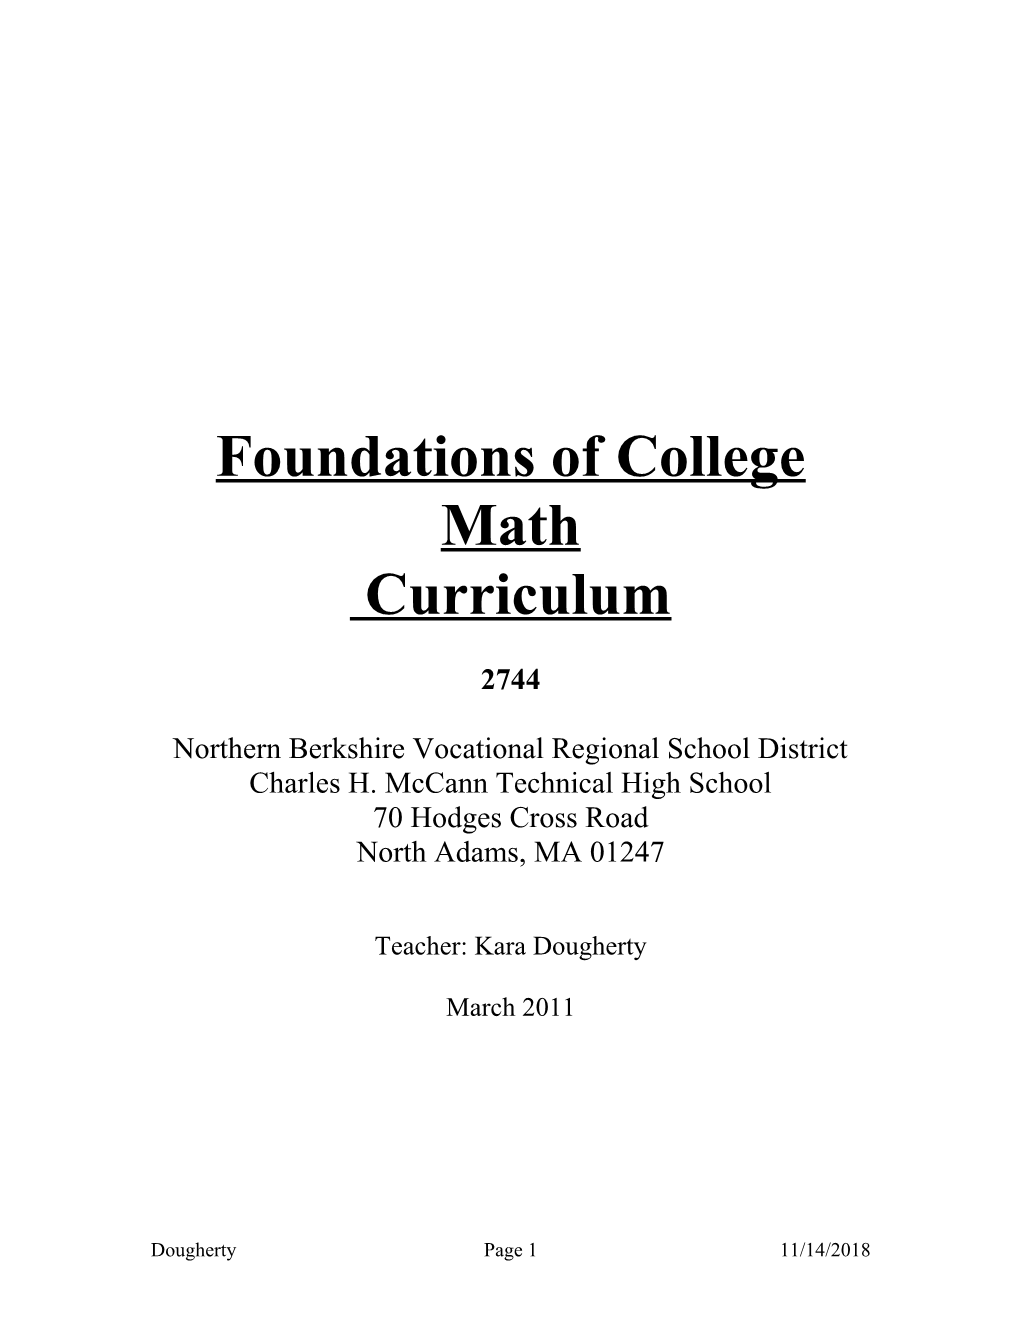 Foundations of College Math